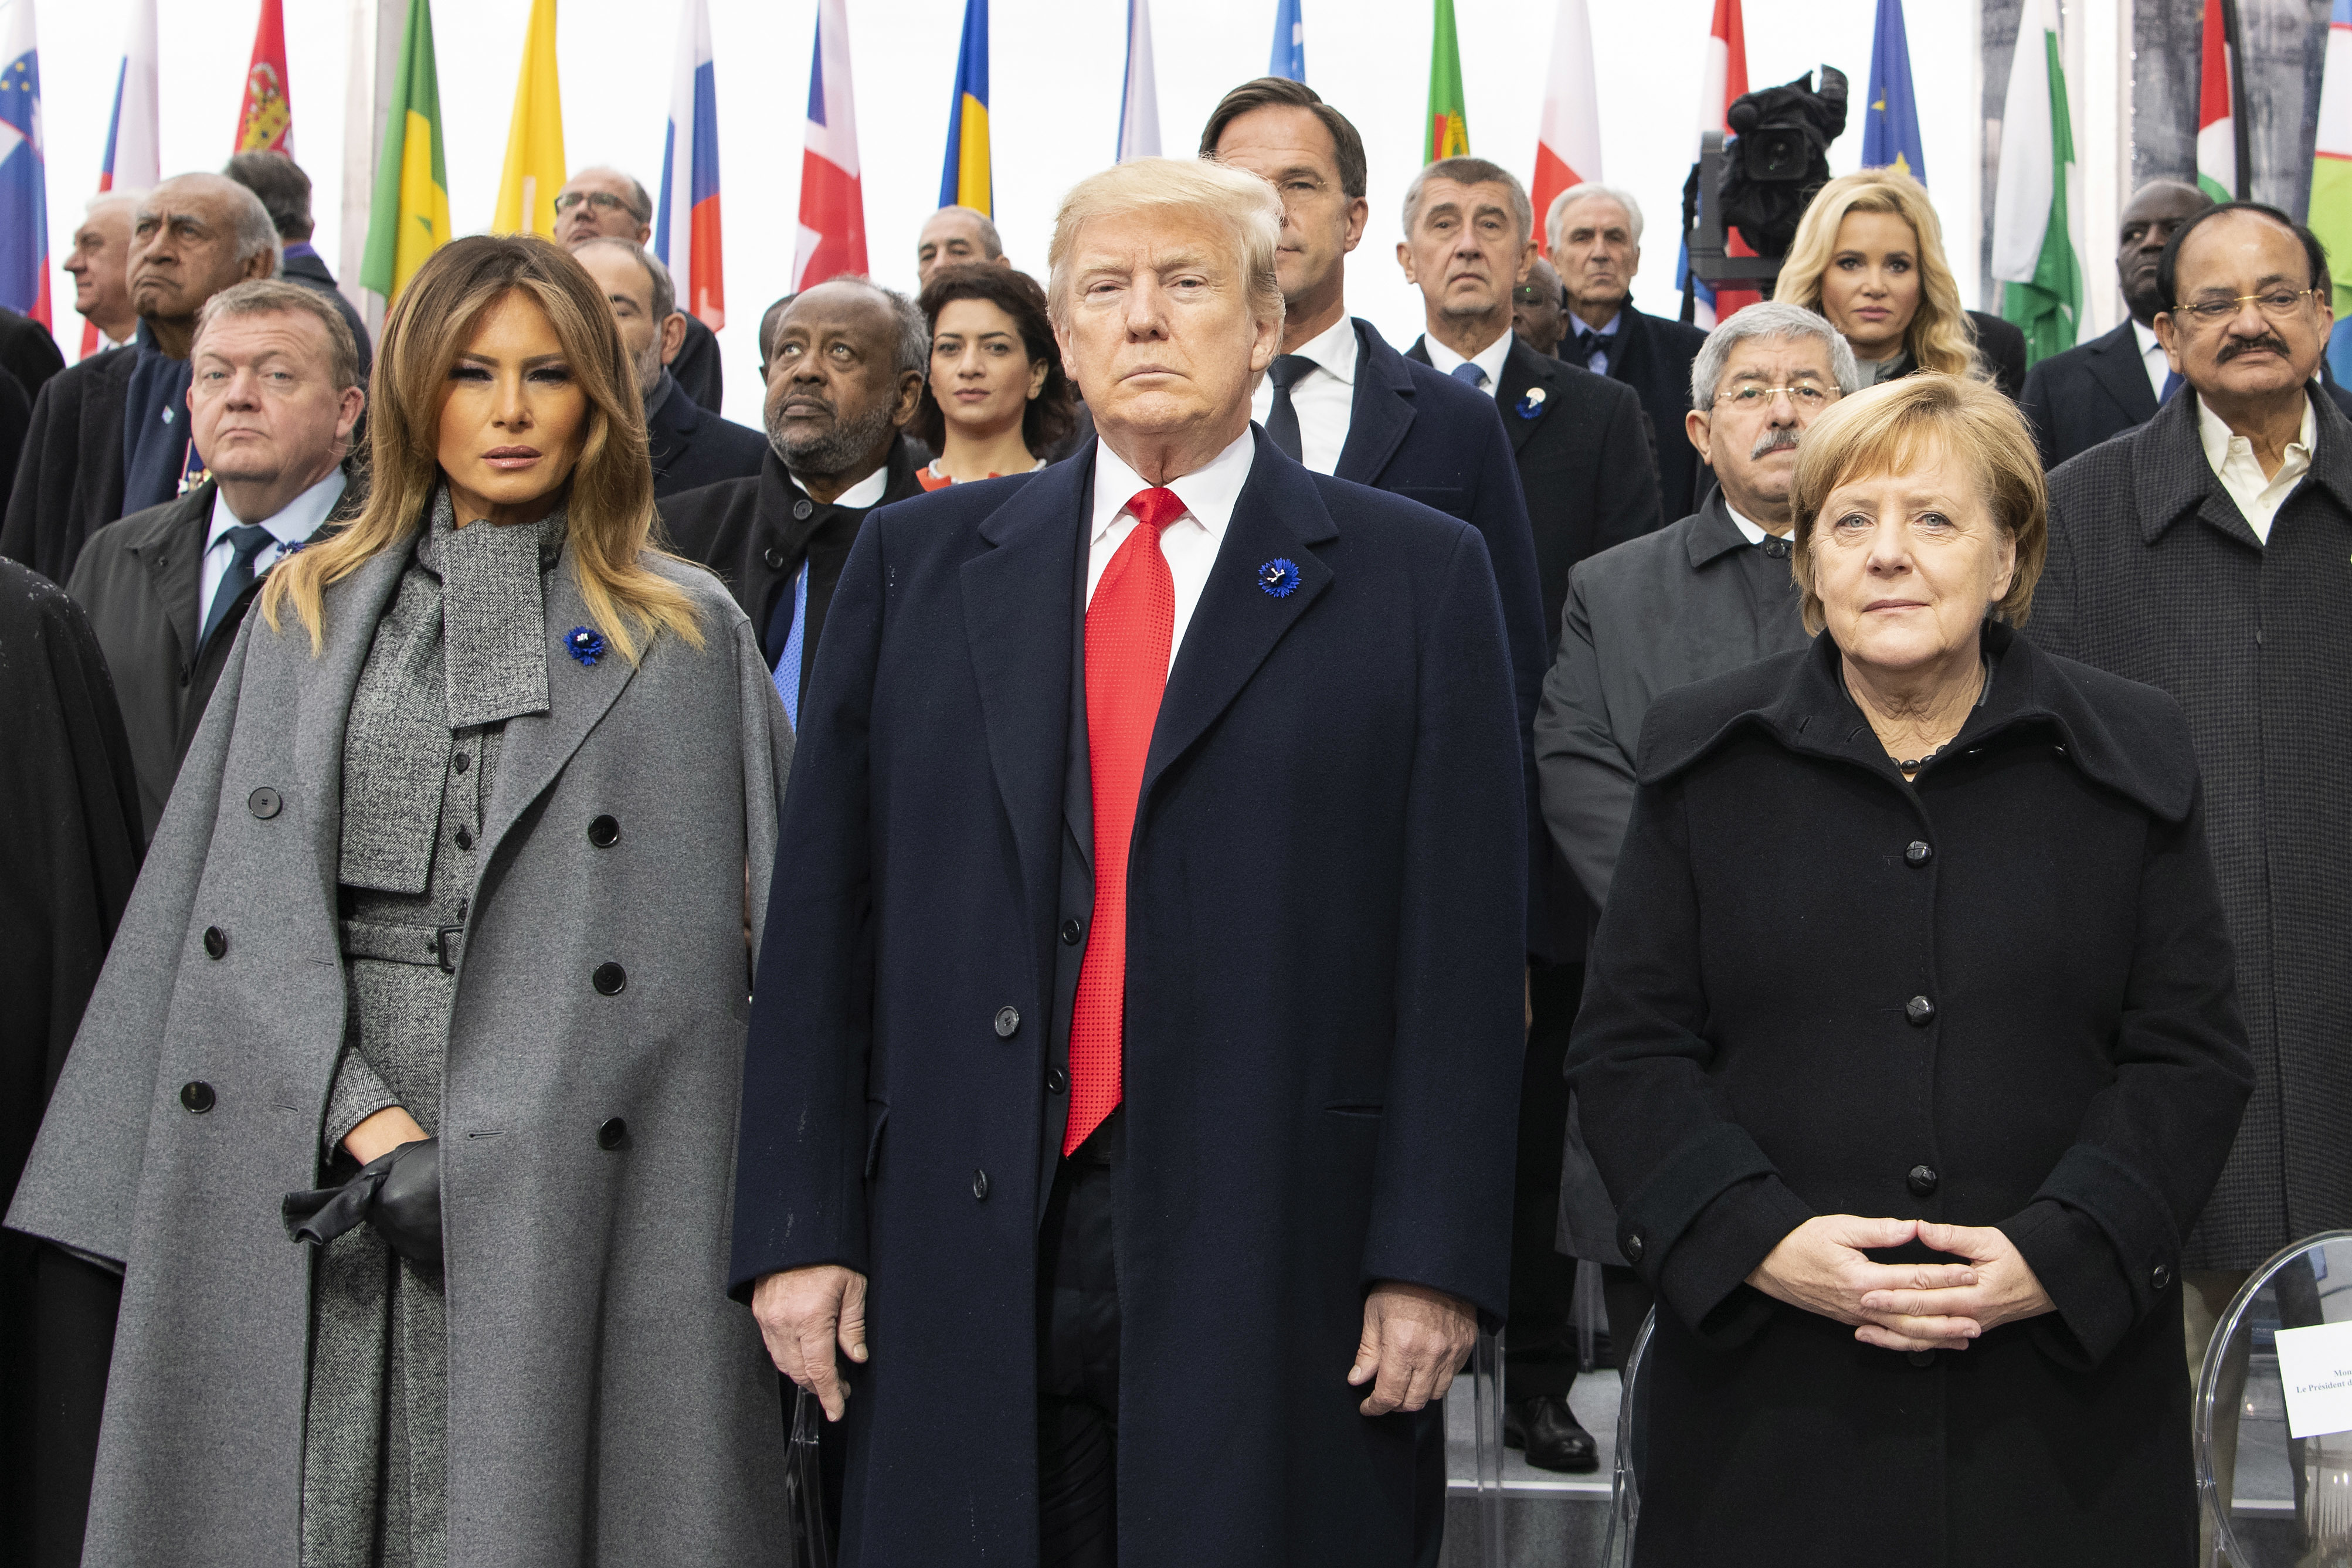 HANDOUT - 11 November 2018, France (France), Paris: Donald Trump (M), President of the USA, First Lady Melania Trump (l) and Chancellor Angela Merkel take part in a commemoration ceremony at the Arc de Triomphe. Around 60 heads of state and government are in Paris to commemorate the end of the First World War a hundred years ago. Photo by: Guido Bergmann/picture-alliance/dpa/AP Images